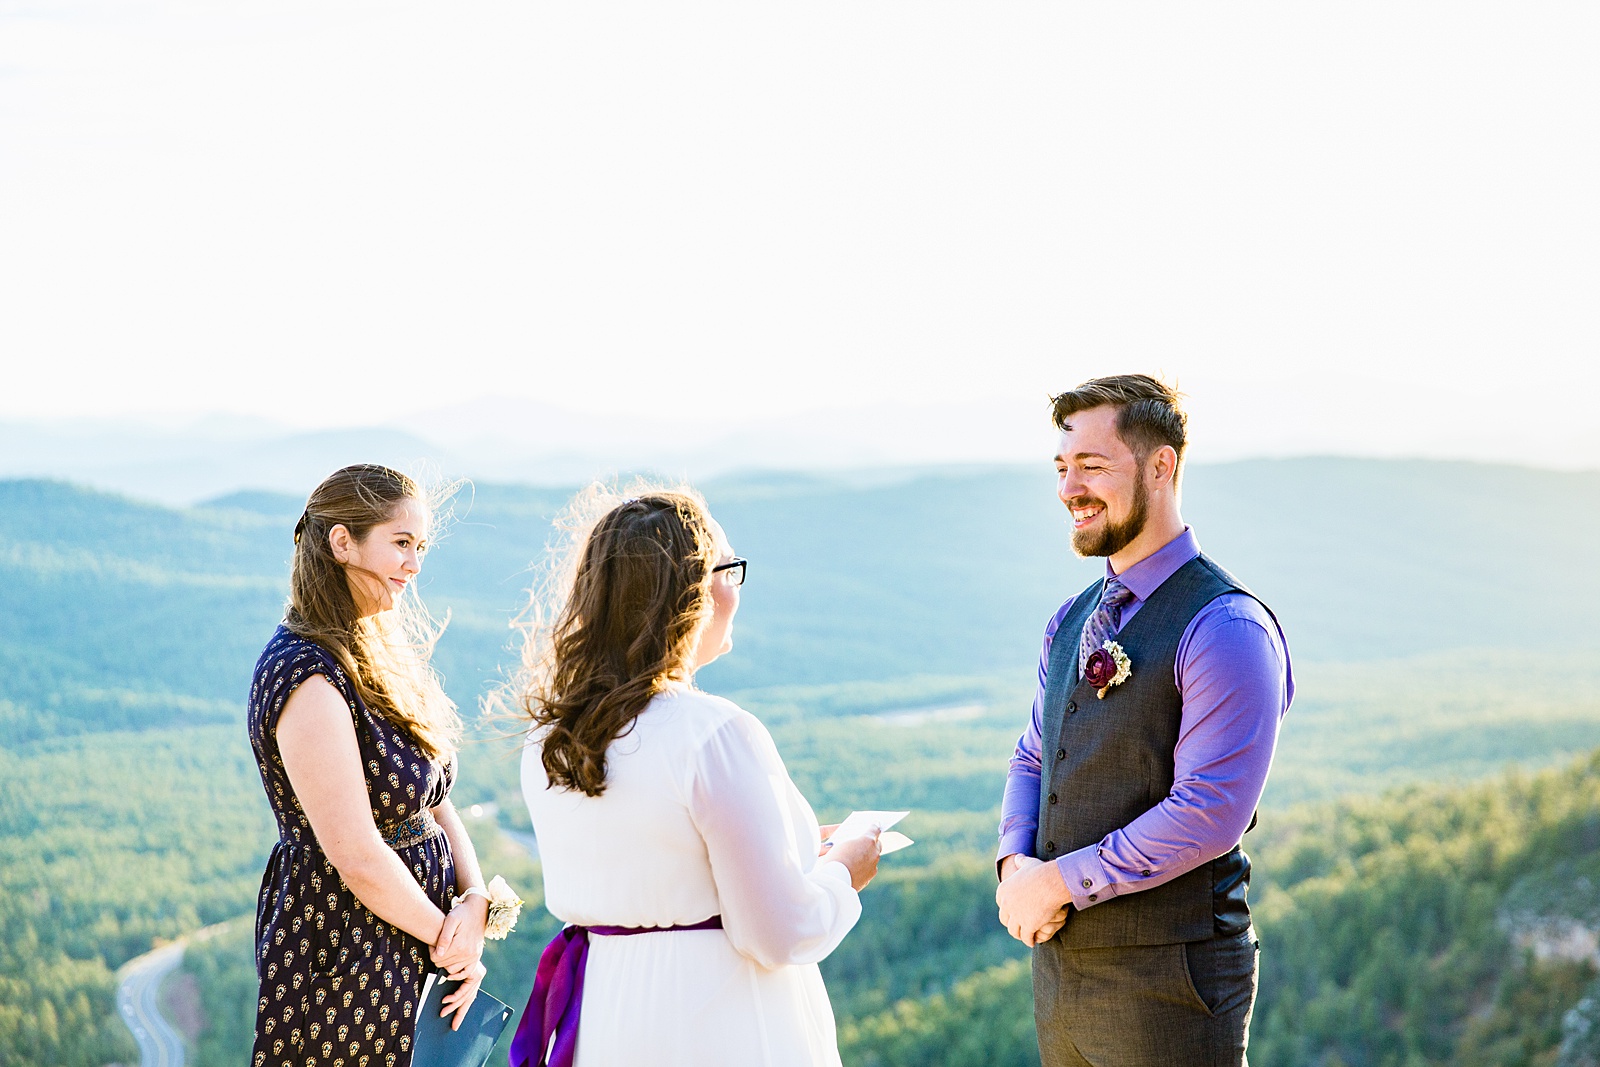 Bride reading her vows during their wedding ceremony at Mogollon Rim by Payson elopement photographer PMA Photography.